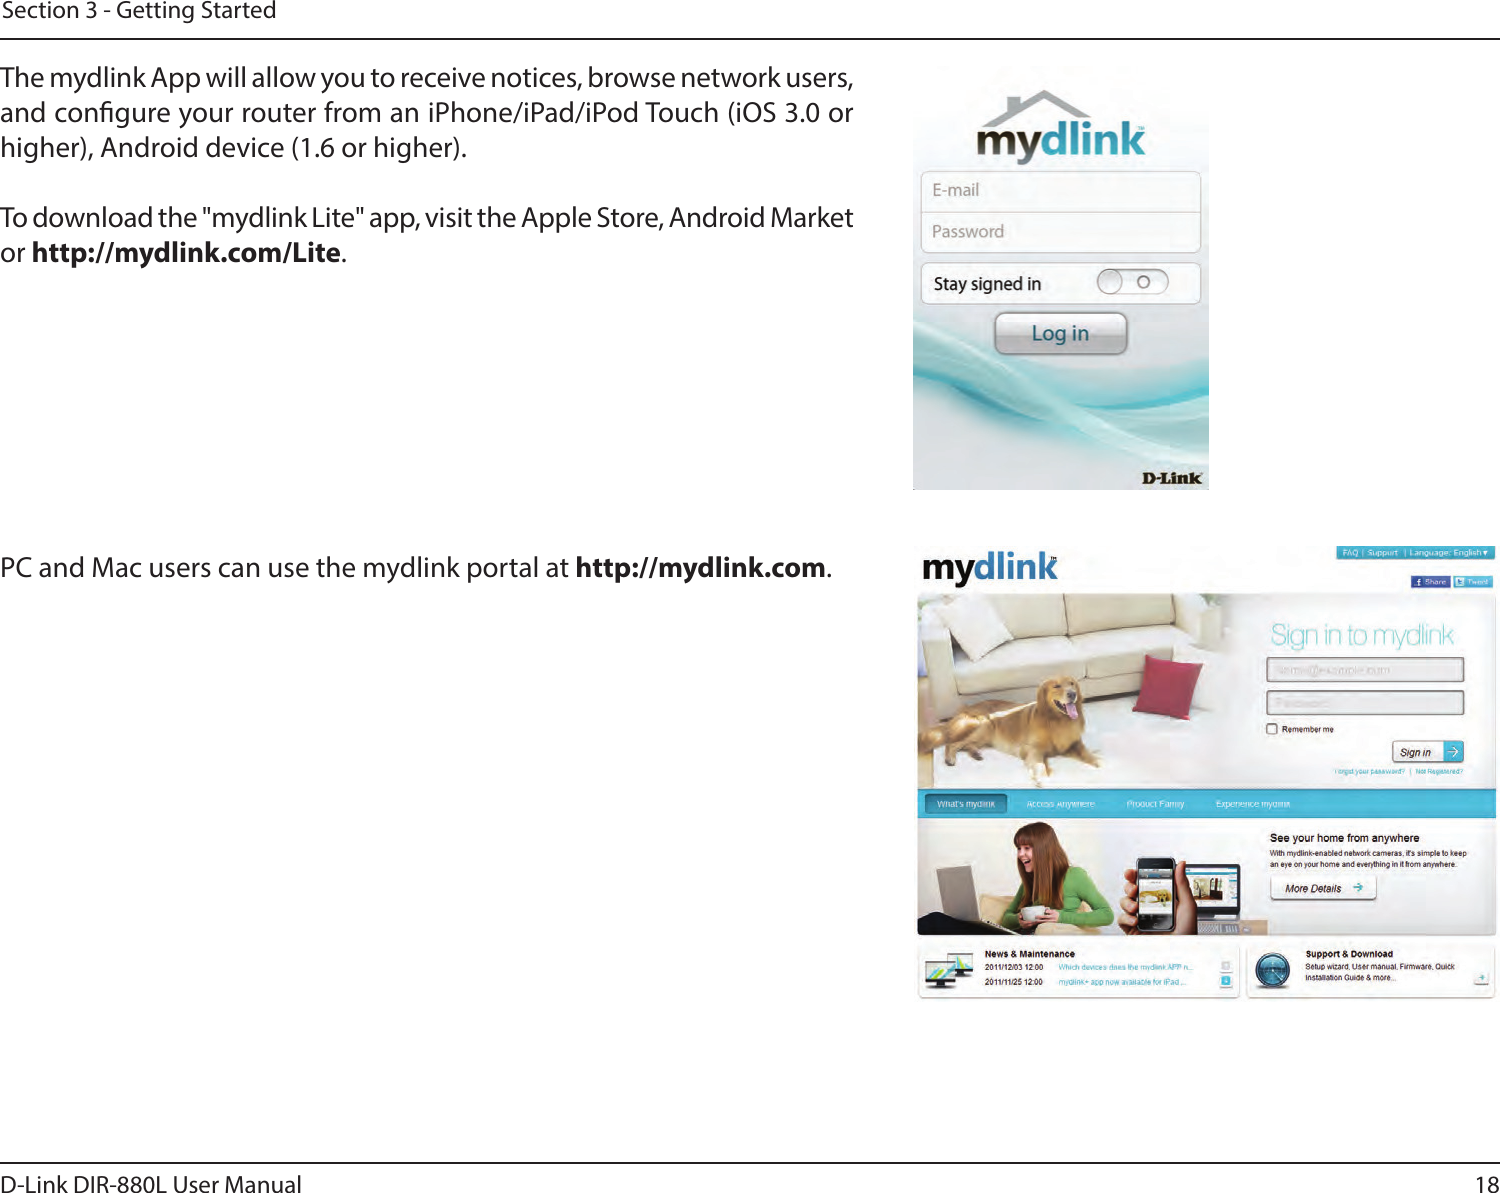 18D-Link DIR-880L User ManualSection 3 - Getting StartedThe mydlink App will allow you to receive notices, browse network users, and congure your router from an iPhone/iPad/iPod Touch (iOS 3.0 or higher), Android device (1.6 or higher).To download the &quot;mydlink Lite&quot; app, visit the Apple Store, Android Market or http://mydlink.com/Lite. PC and Mac users can use the mydlink portal at http://mydlink.com.